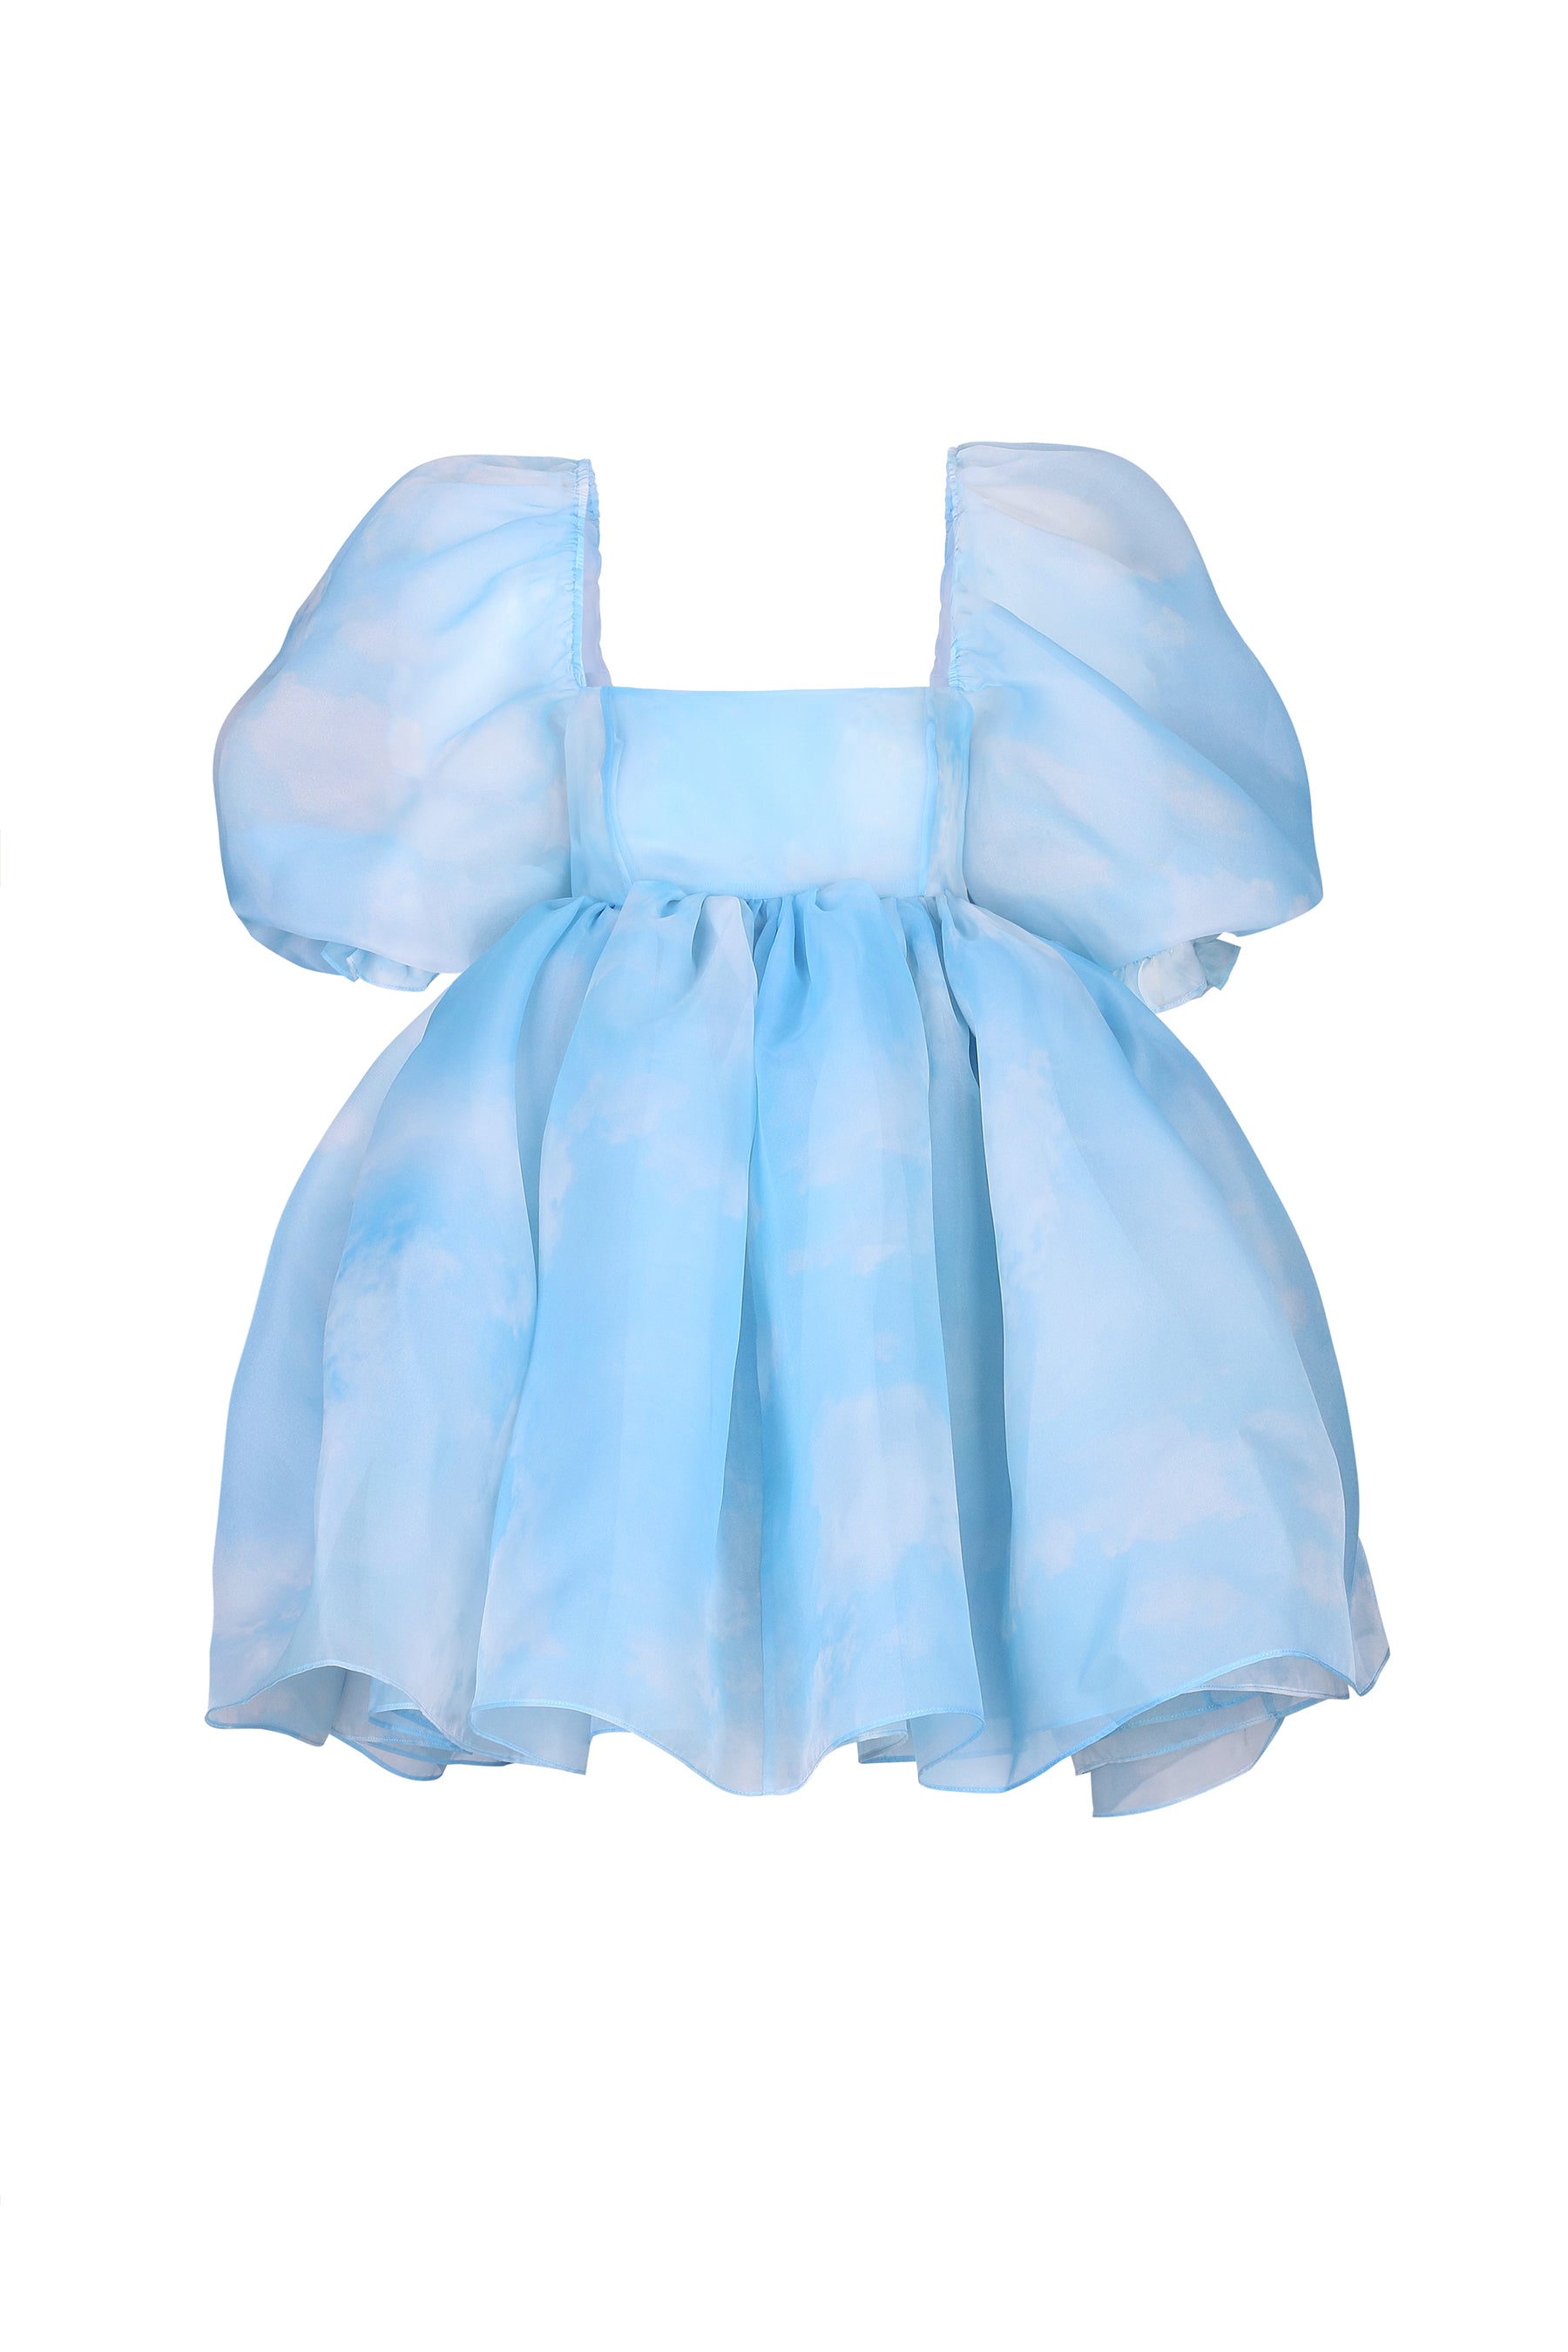 Head in the Clouds Puff Dress - Pre Order Ships May 5th - June 30th ...